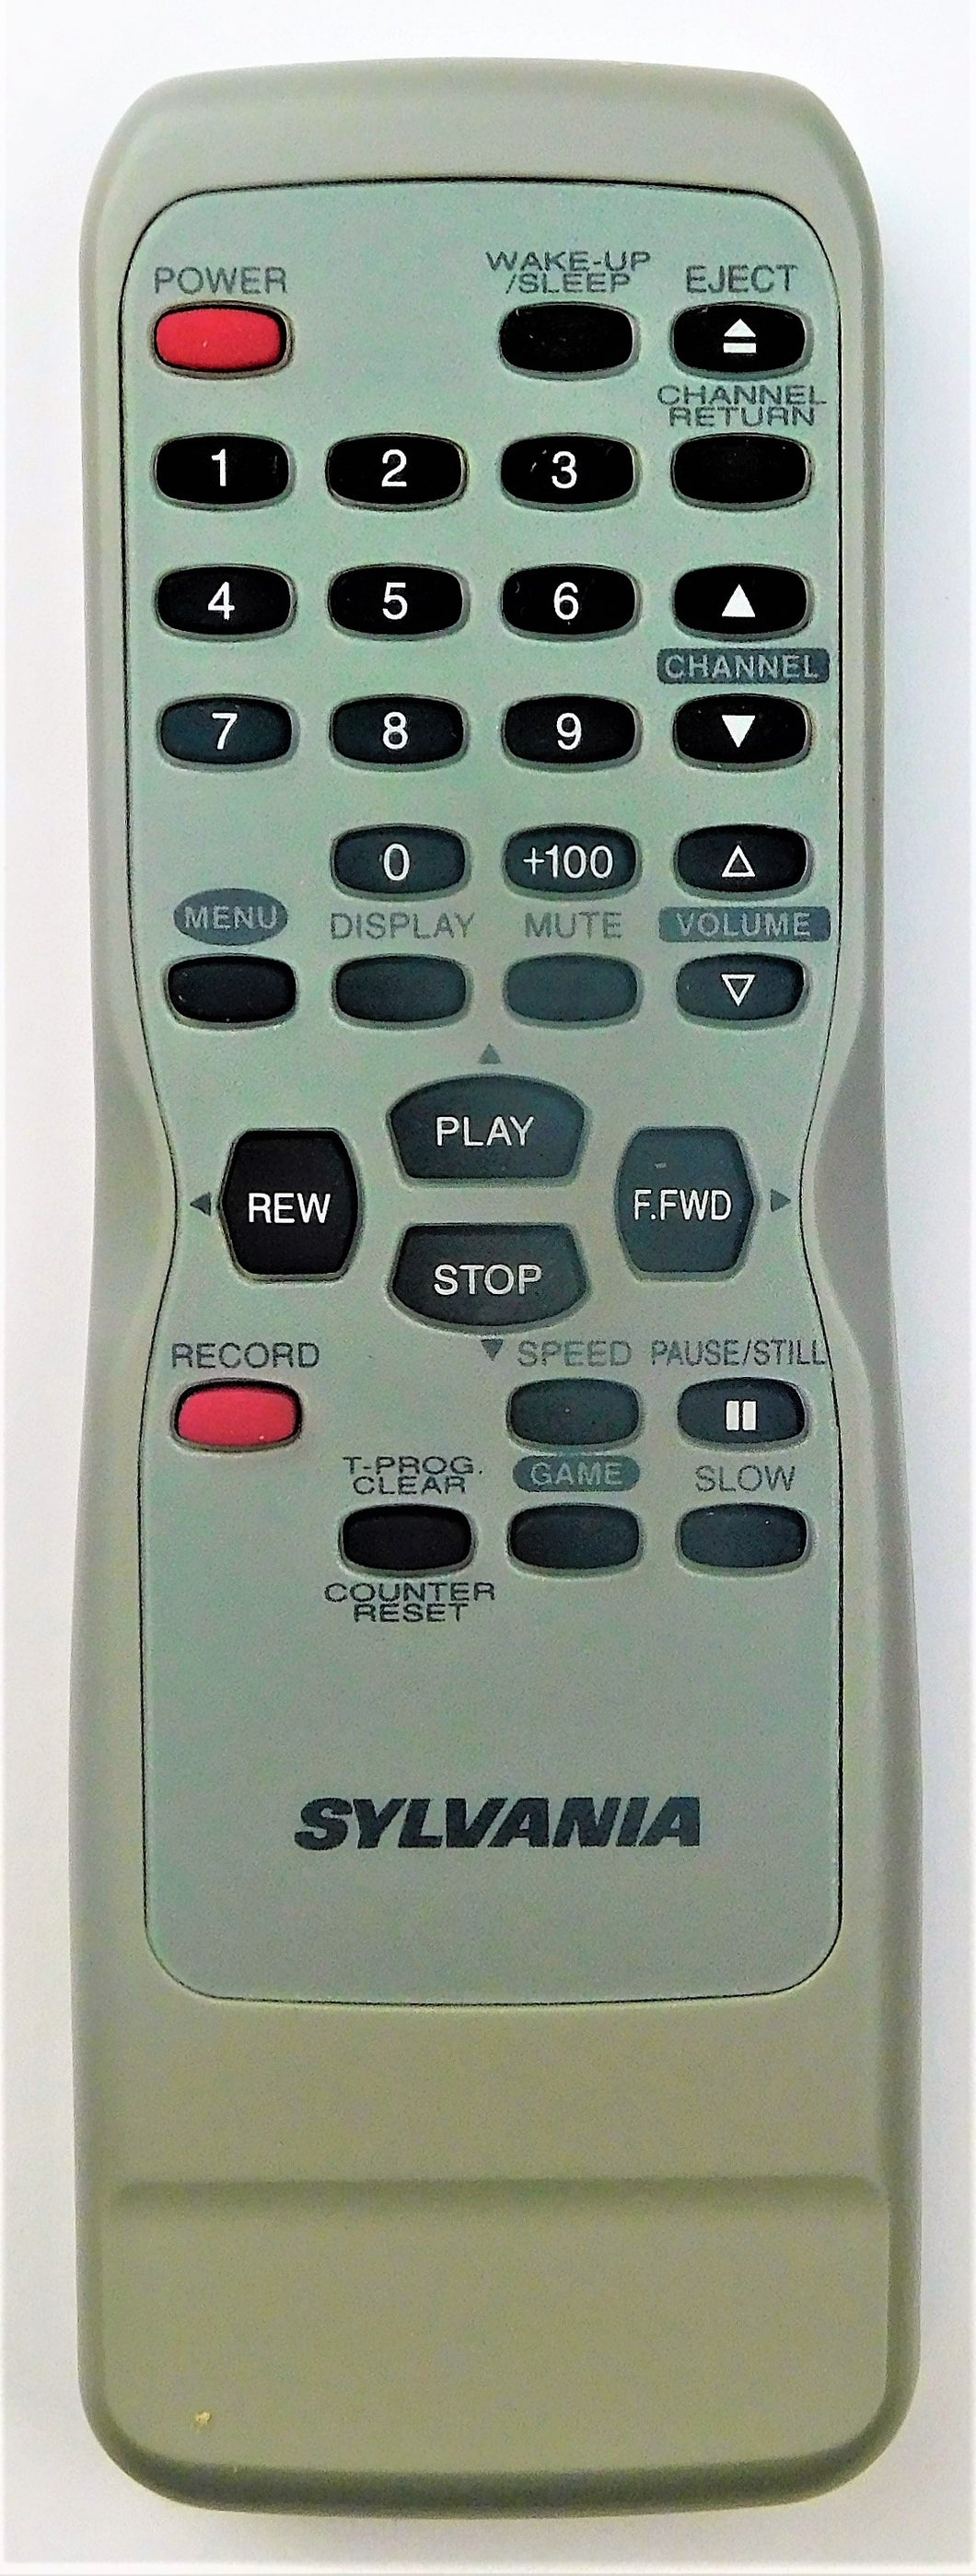 OEM replacement remote control for Sylvania CRT TV, DVD & VCR COMBOs NE138UD